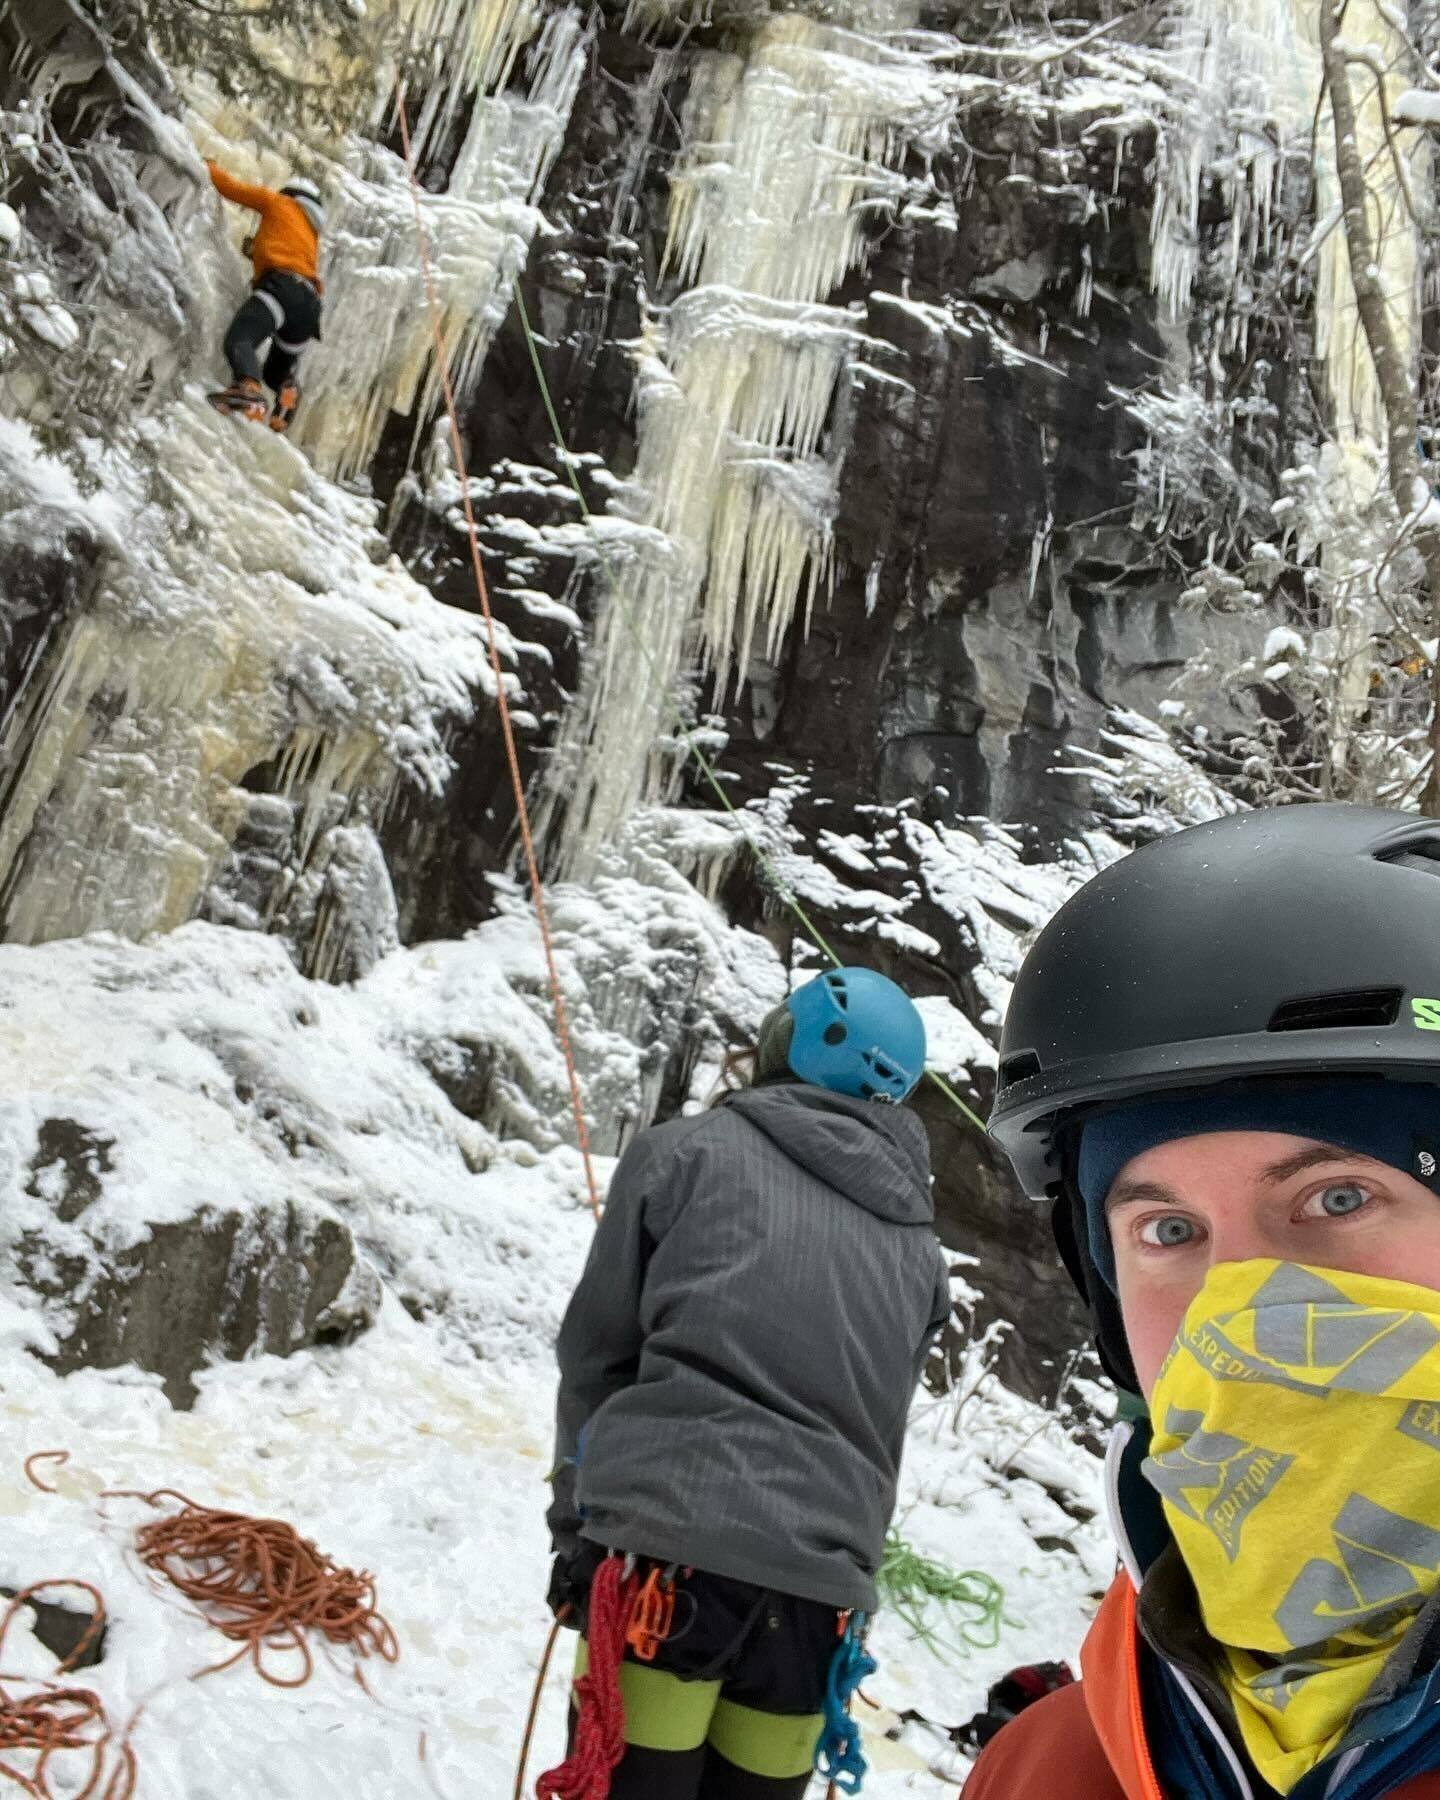 A climber ascends a frozen waterfall, secured by ropes, while two others watch. They are equipped with climbing gear in a snowy, icy environment.